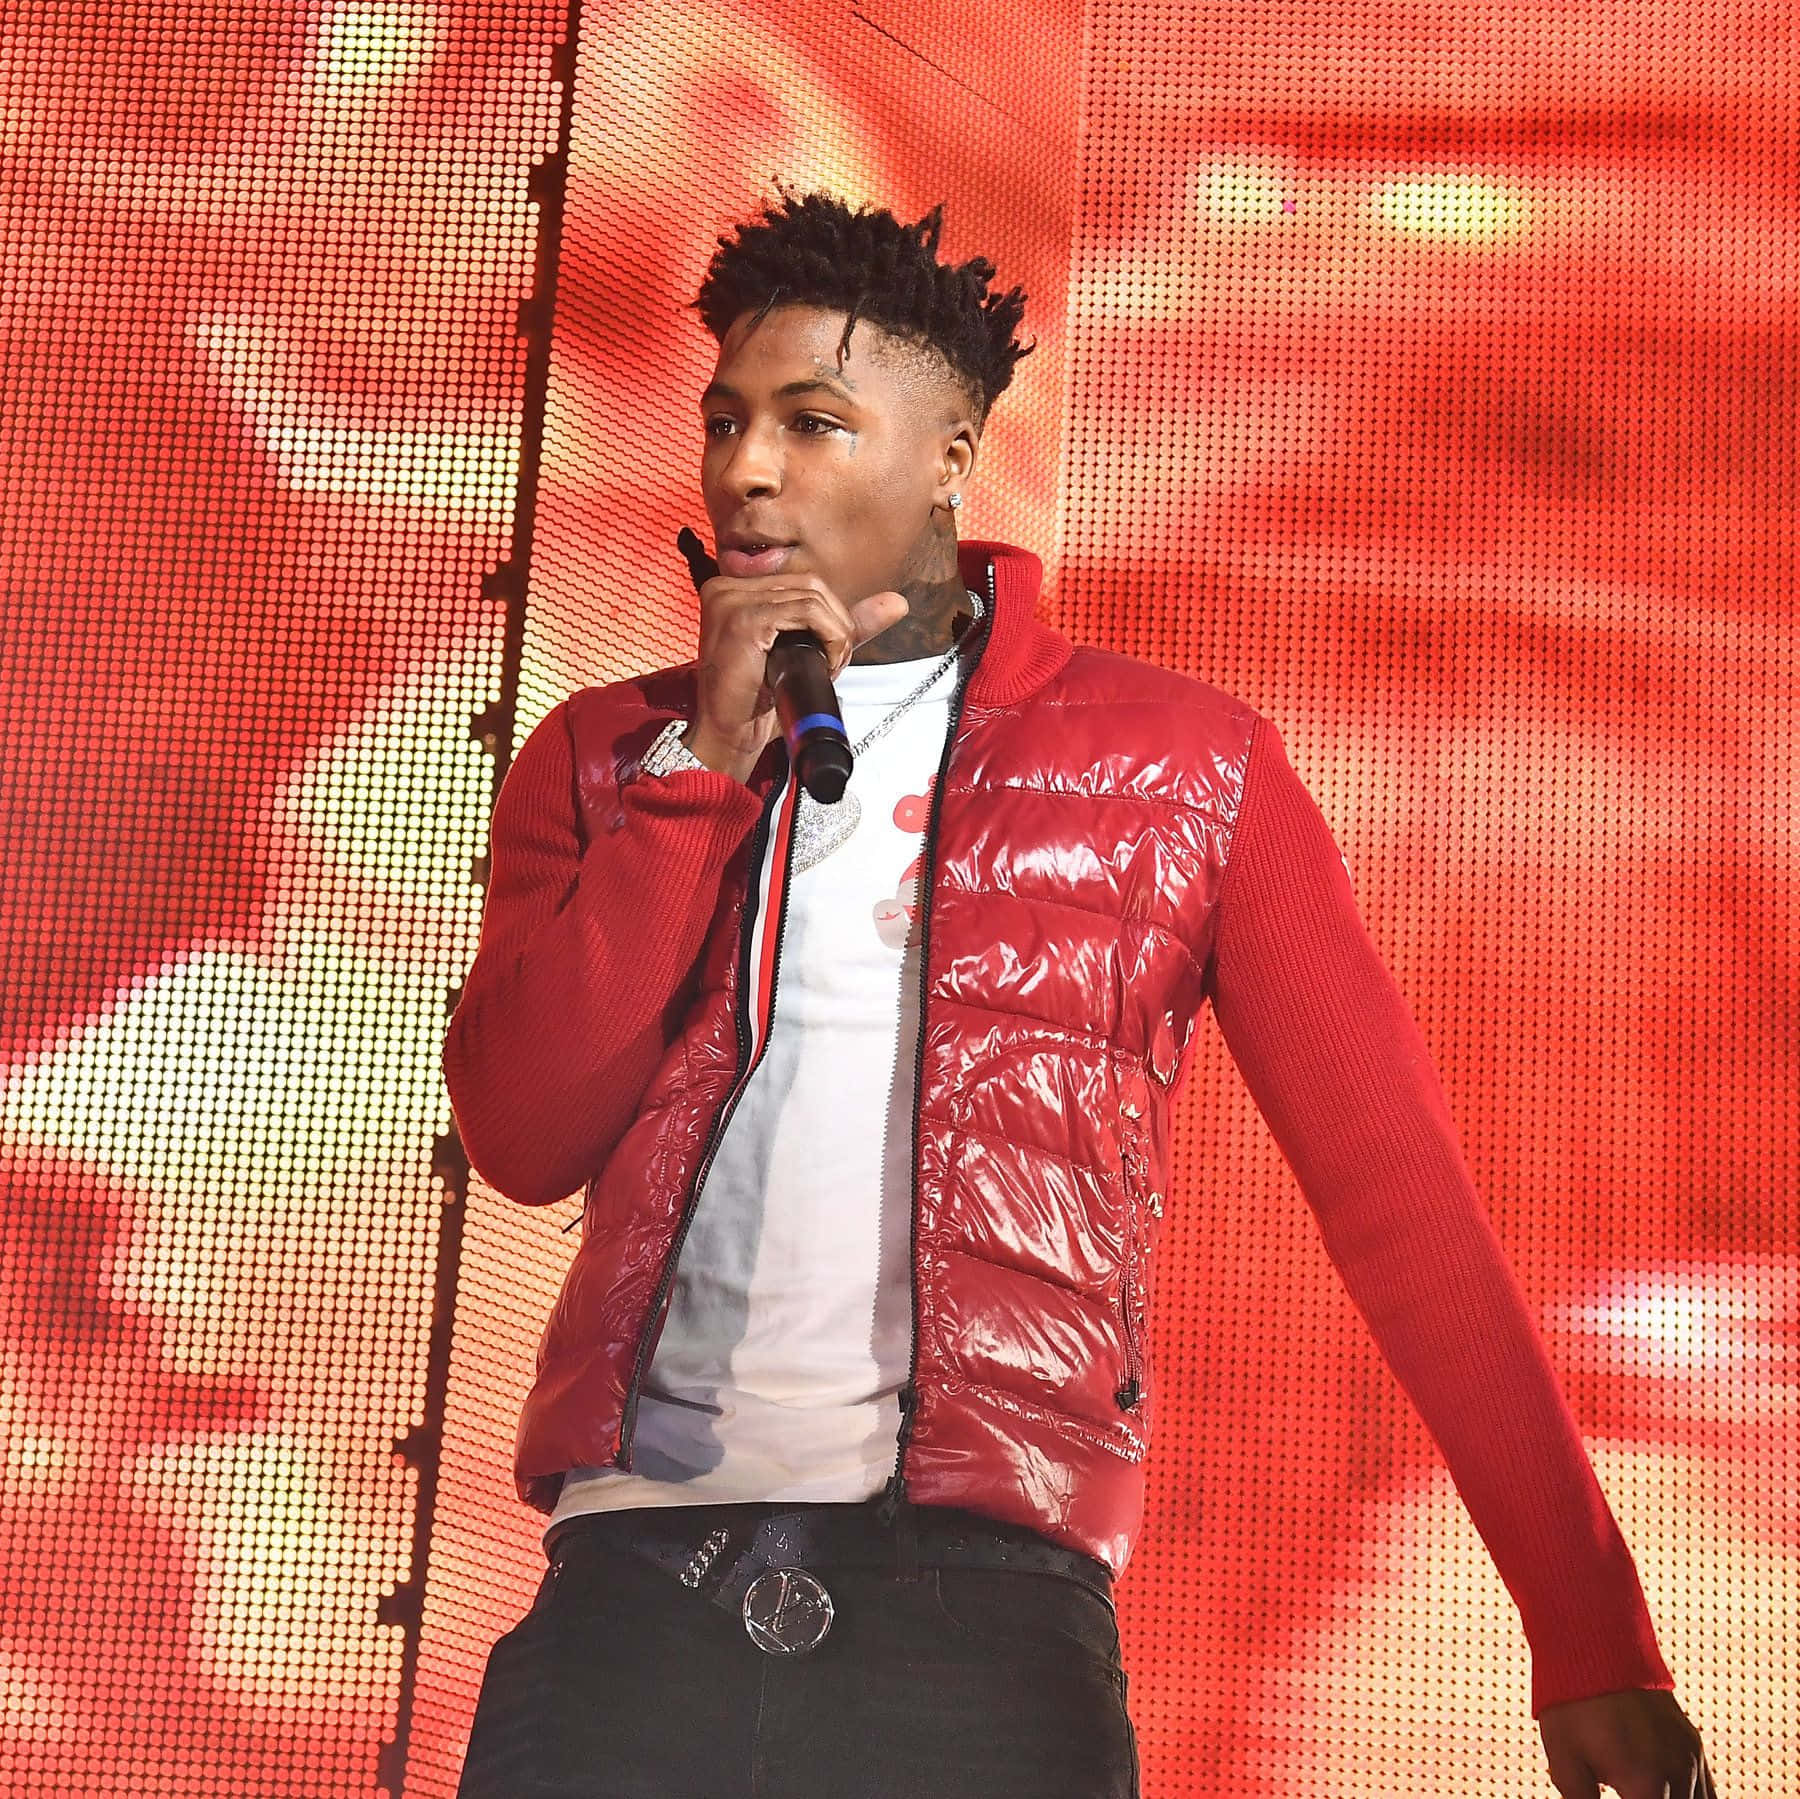 Youngboy in a bold and stylish look